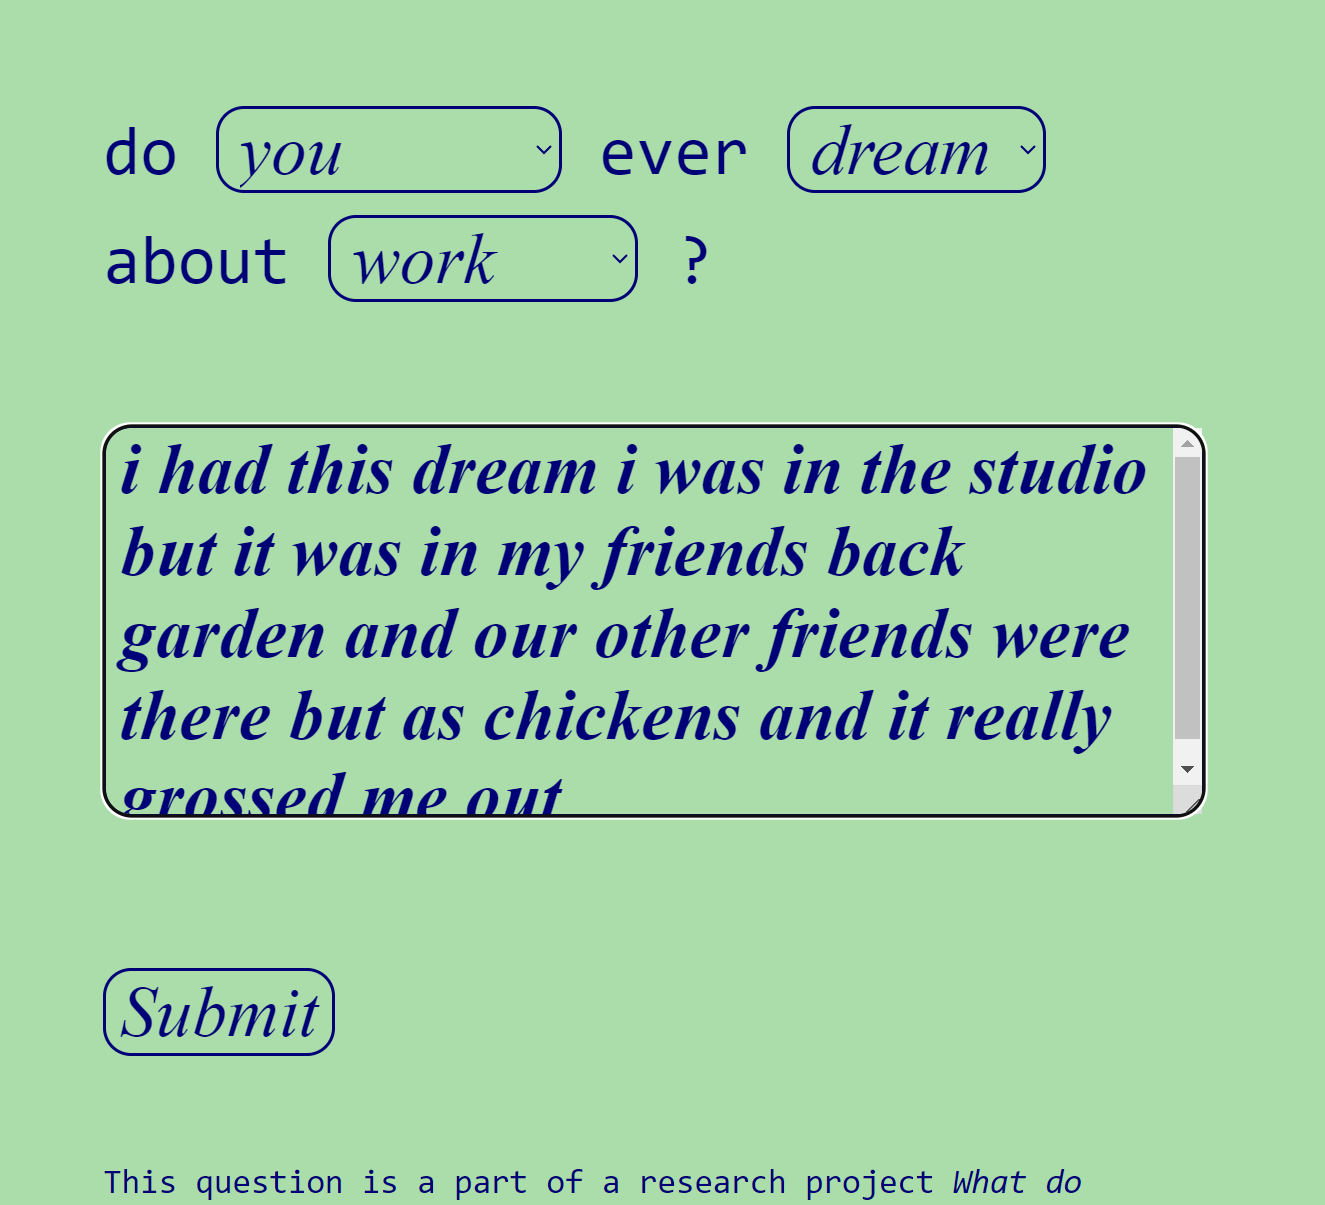 do you ever dream about work? Online research and publication where we shared our dreams, worries, rants, designs. The answers to the question are published together as a collection of voices.